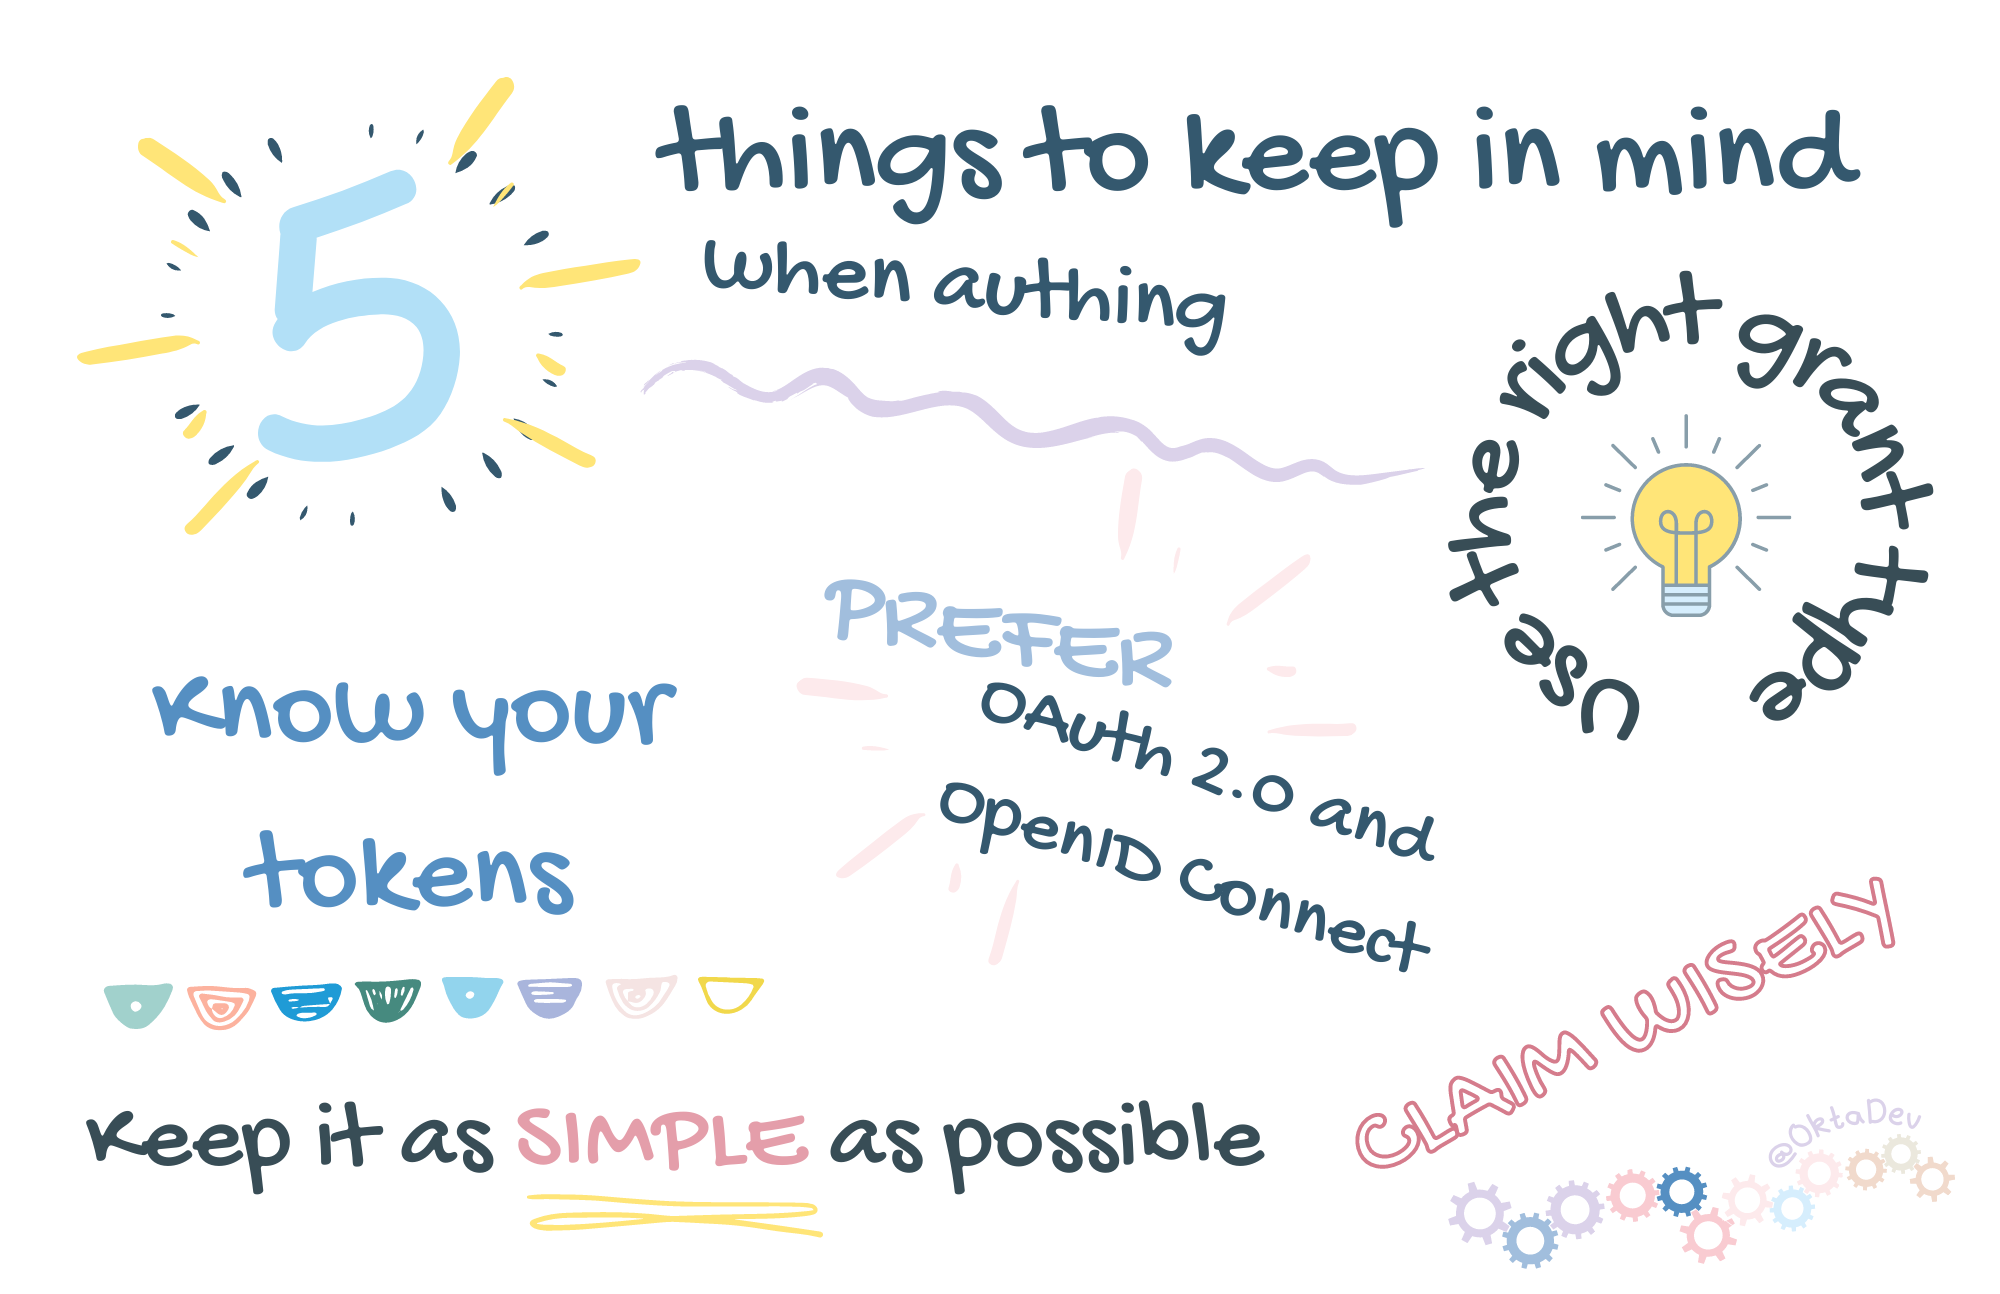 The 5 things to keep in mind with authing